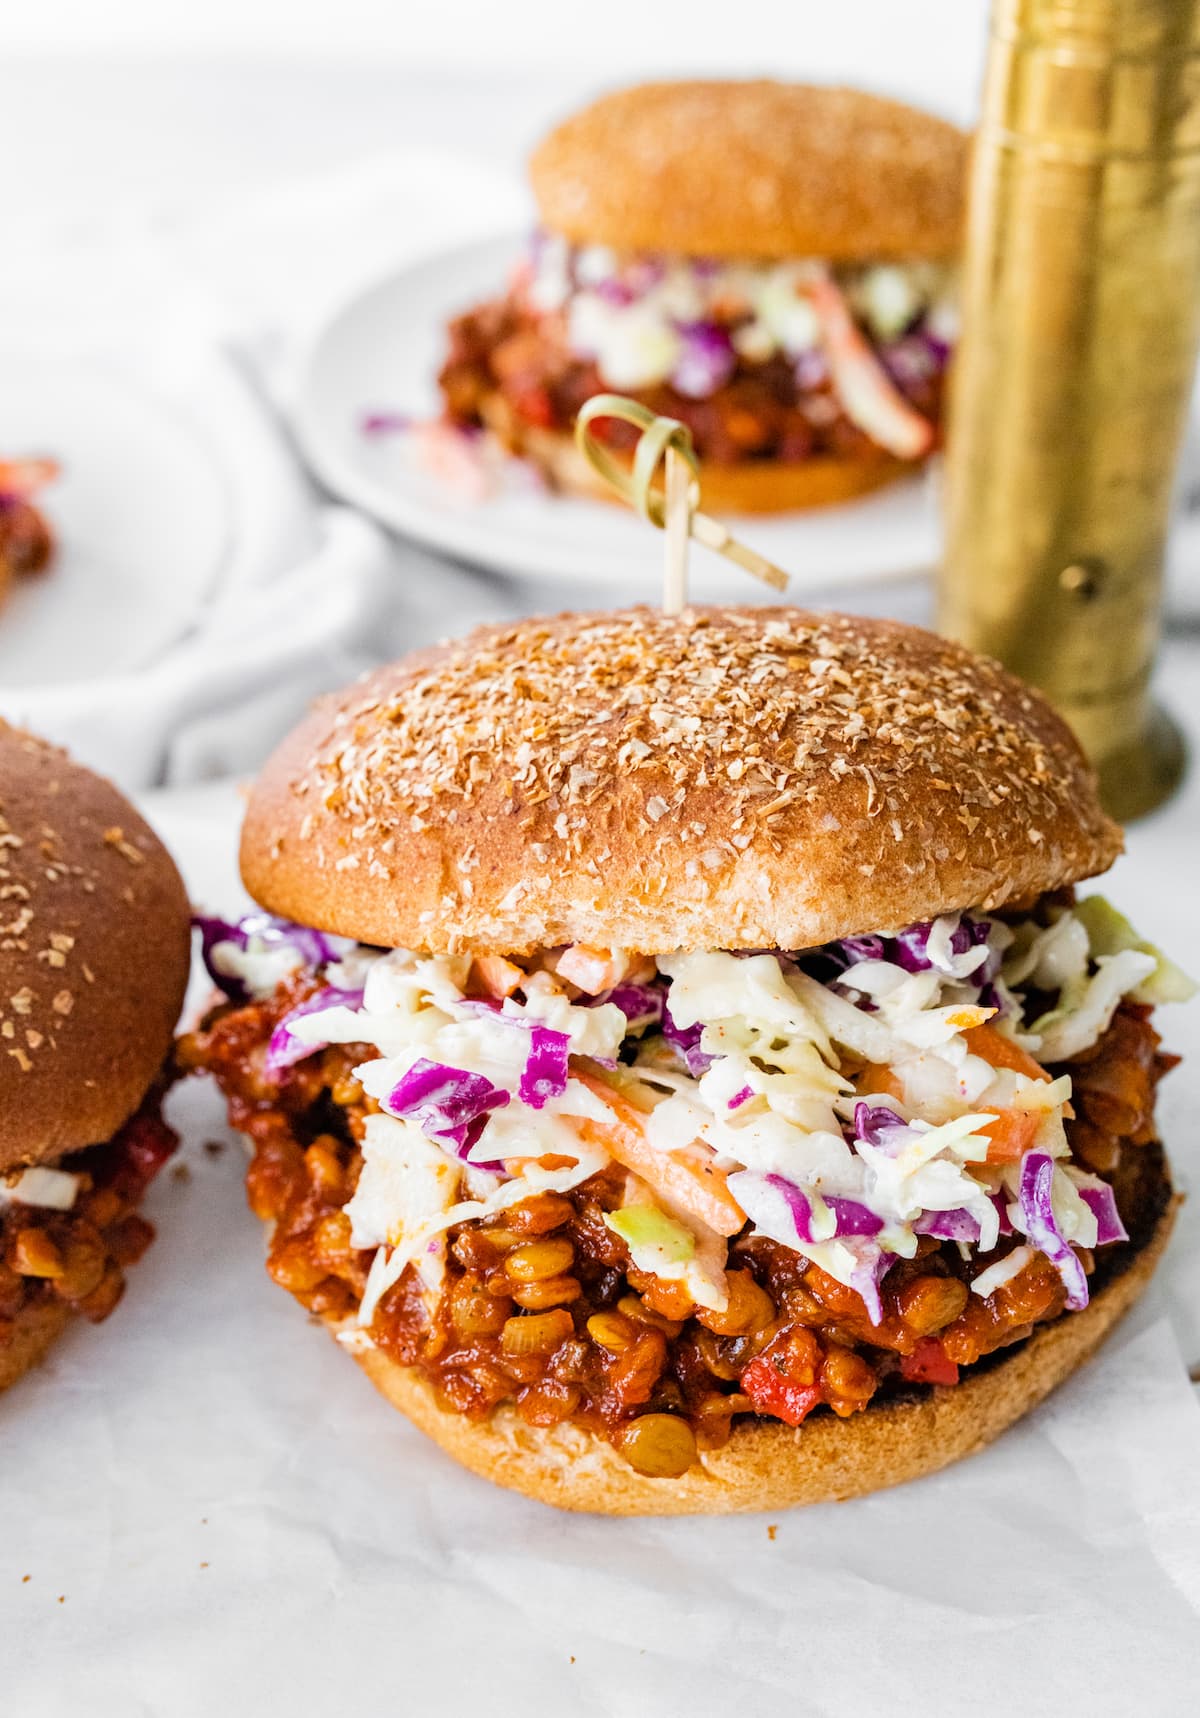 One vegan Sloppy Joe on a whole wheat bun topped with coleslaw with a second vegan Sloppy Joe in the background on a plate.